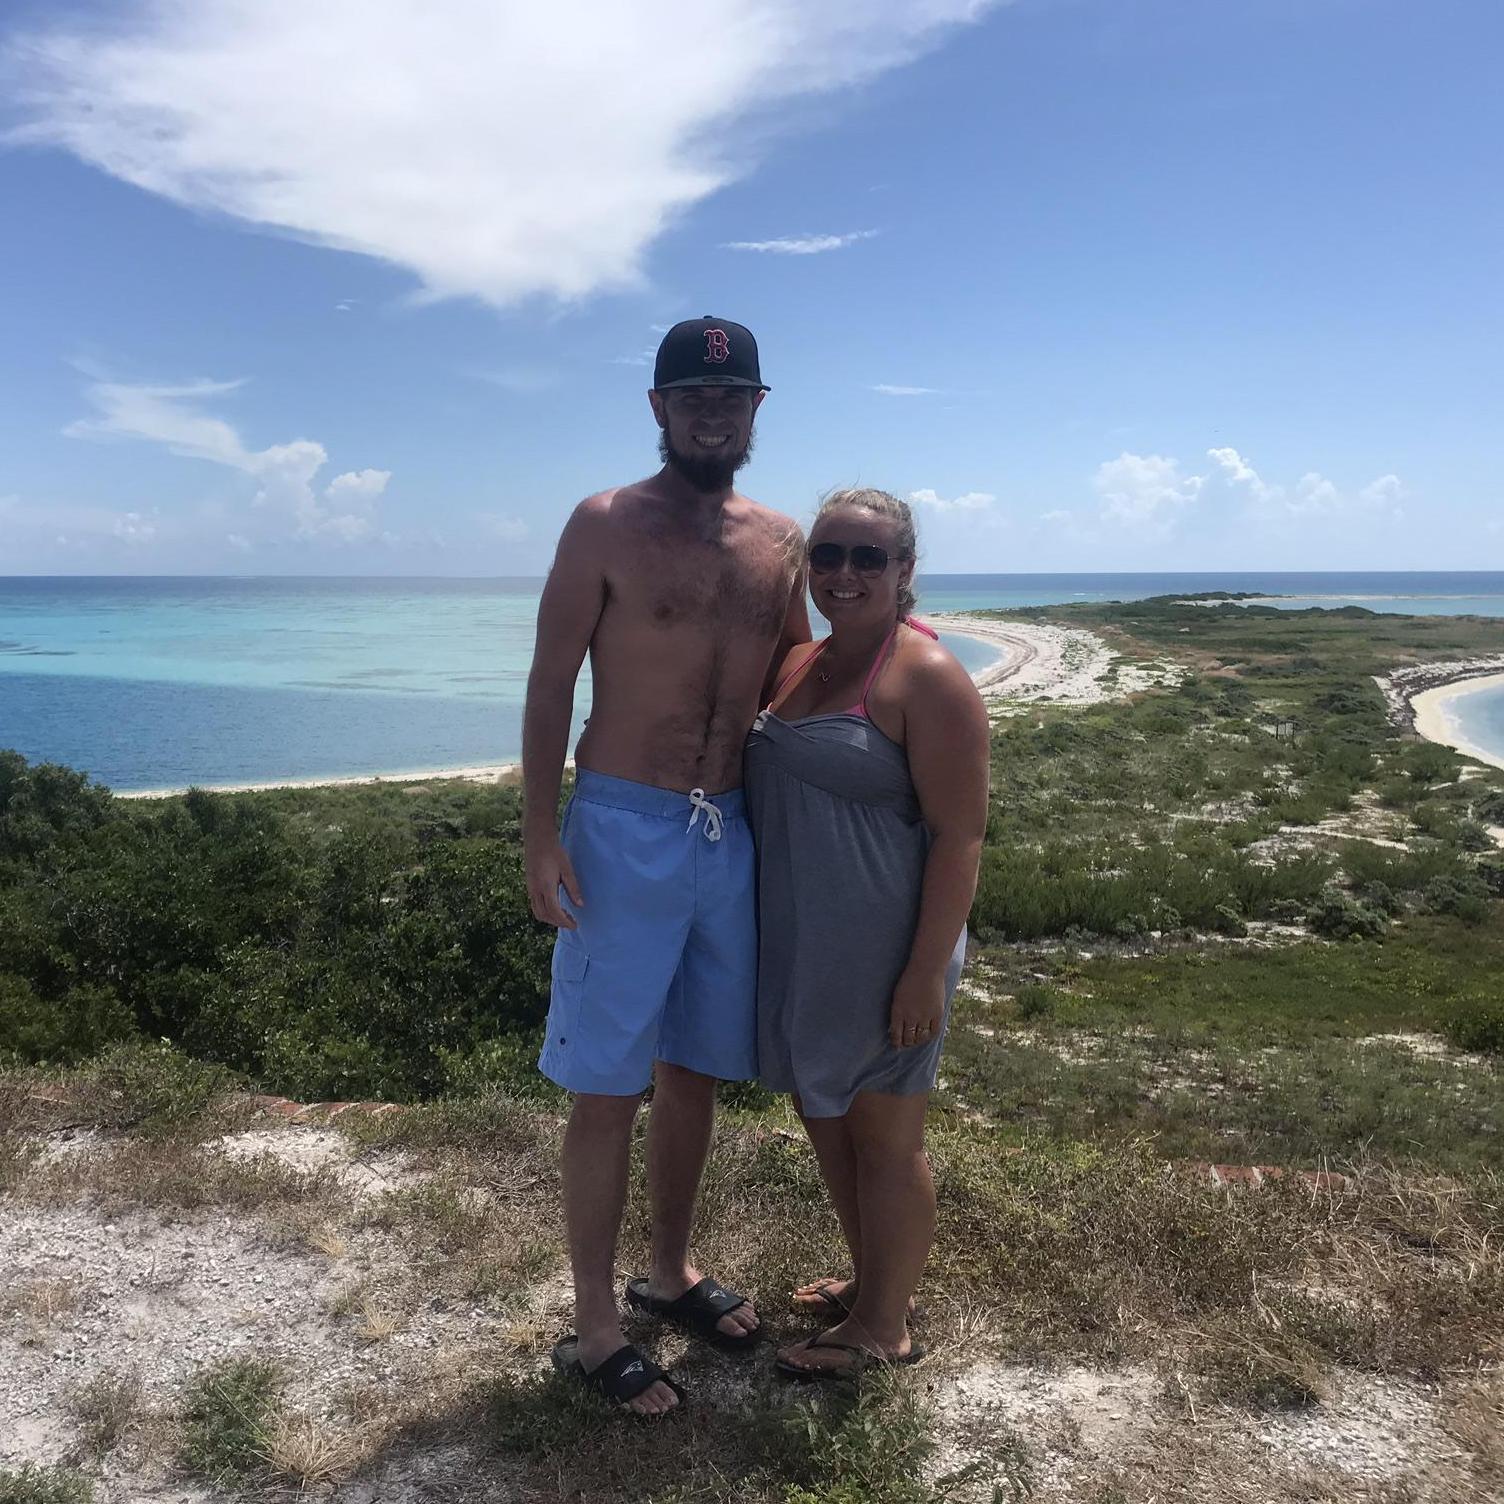 This is us standing on Fort Zachary! We took a boat here while on our trip to Key West and it was the most amazing place.